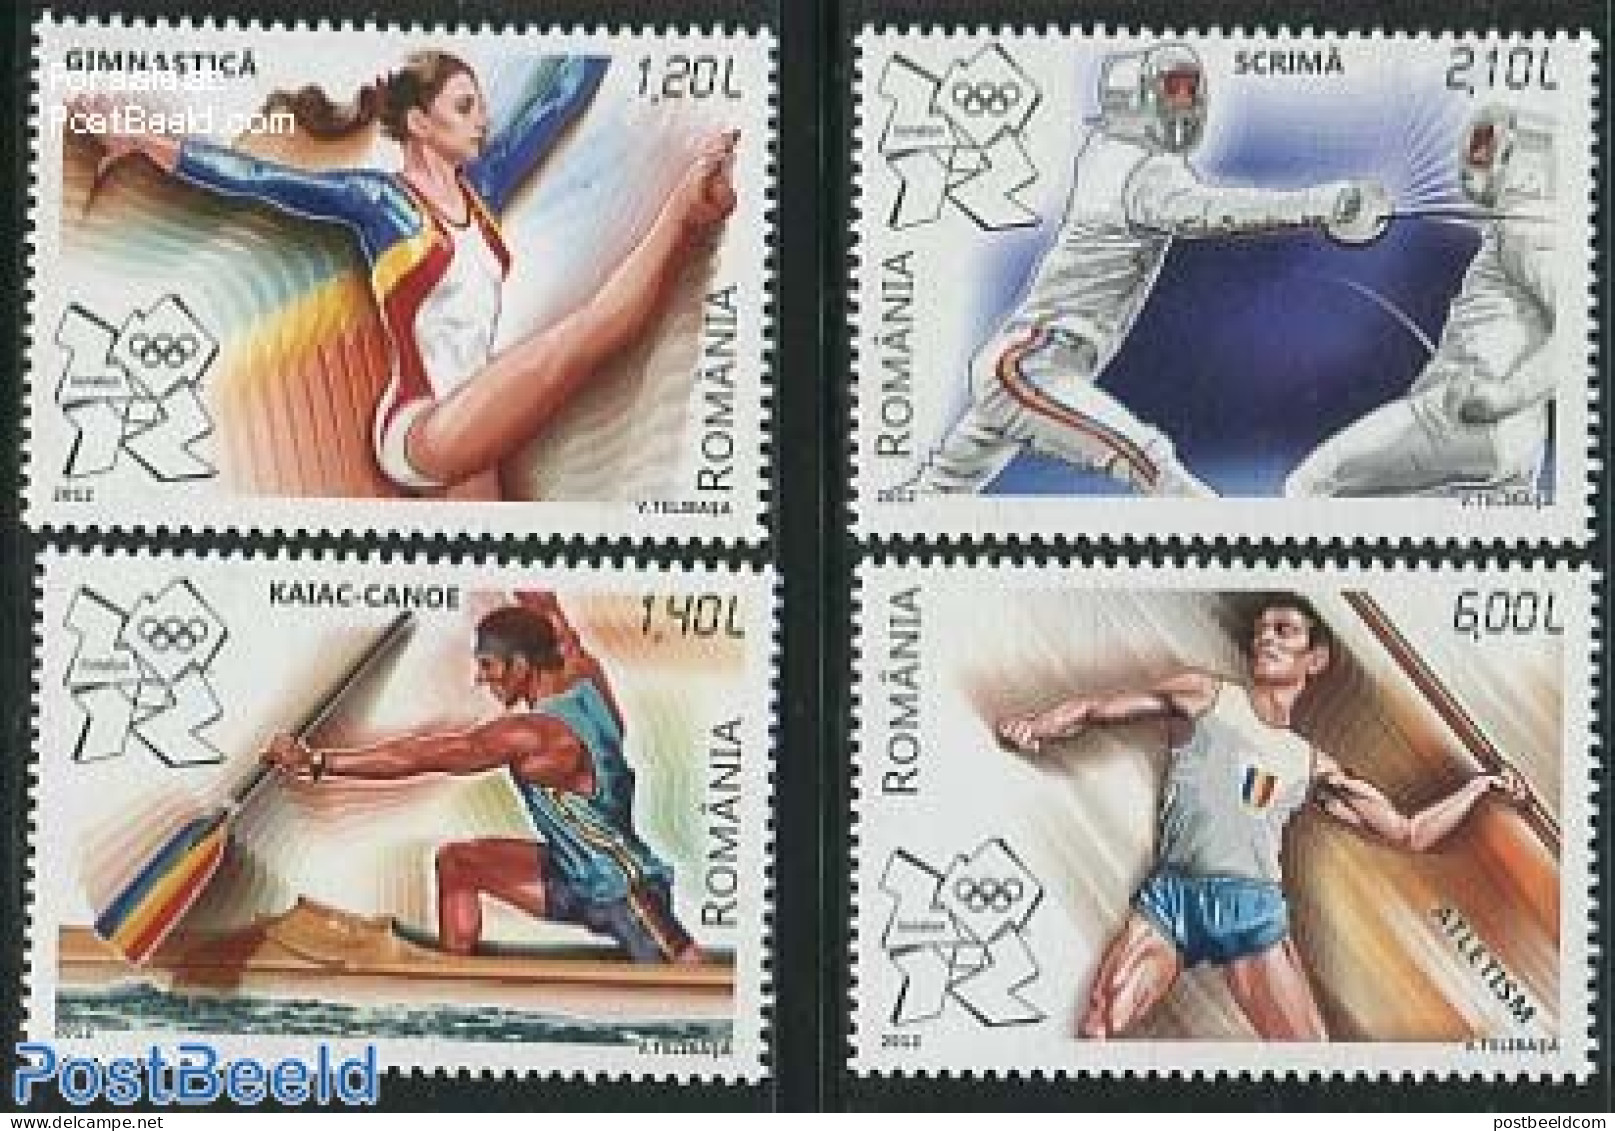 Romania 2012 Olympic Games London 4v, Mint NH, Sport - Athletics - Fencing - Kayaks & Rowing - Olympic Games - Nuevos